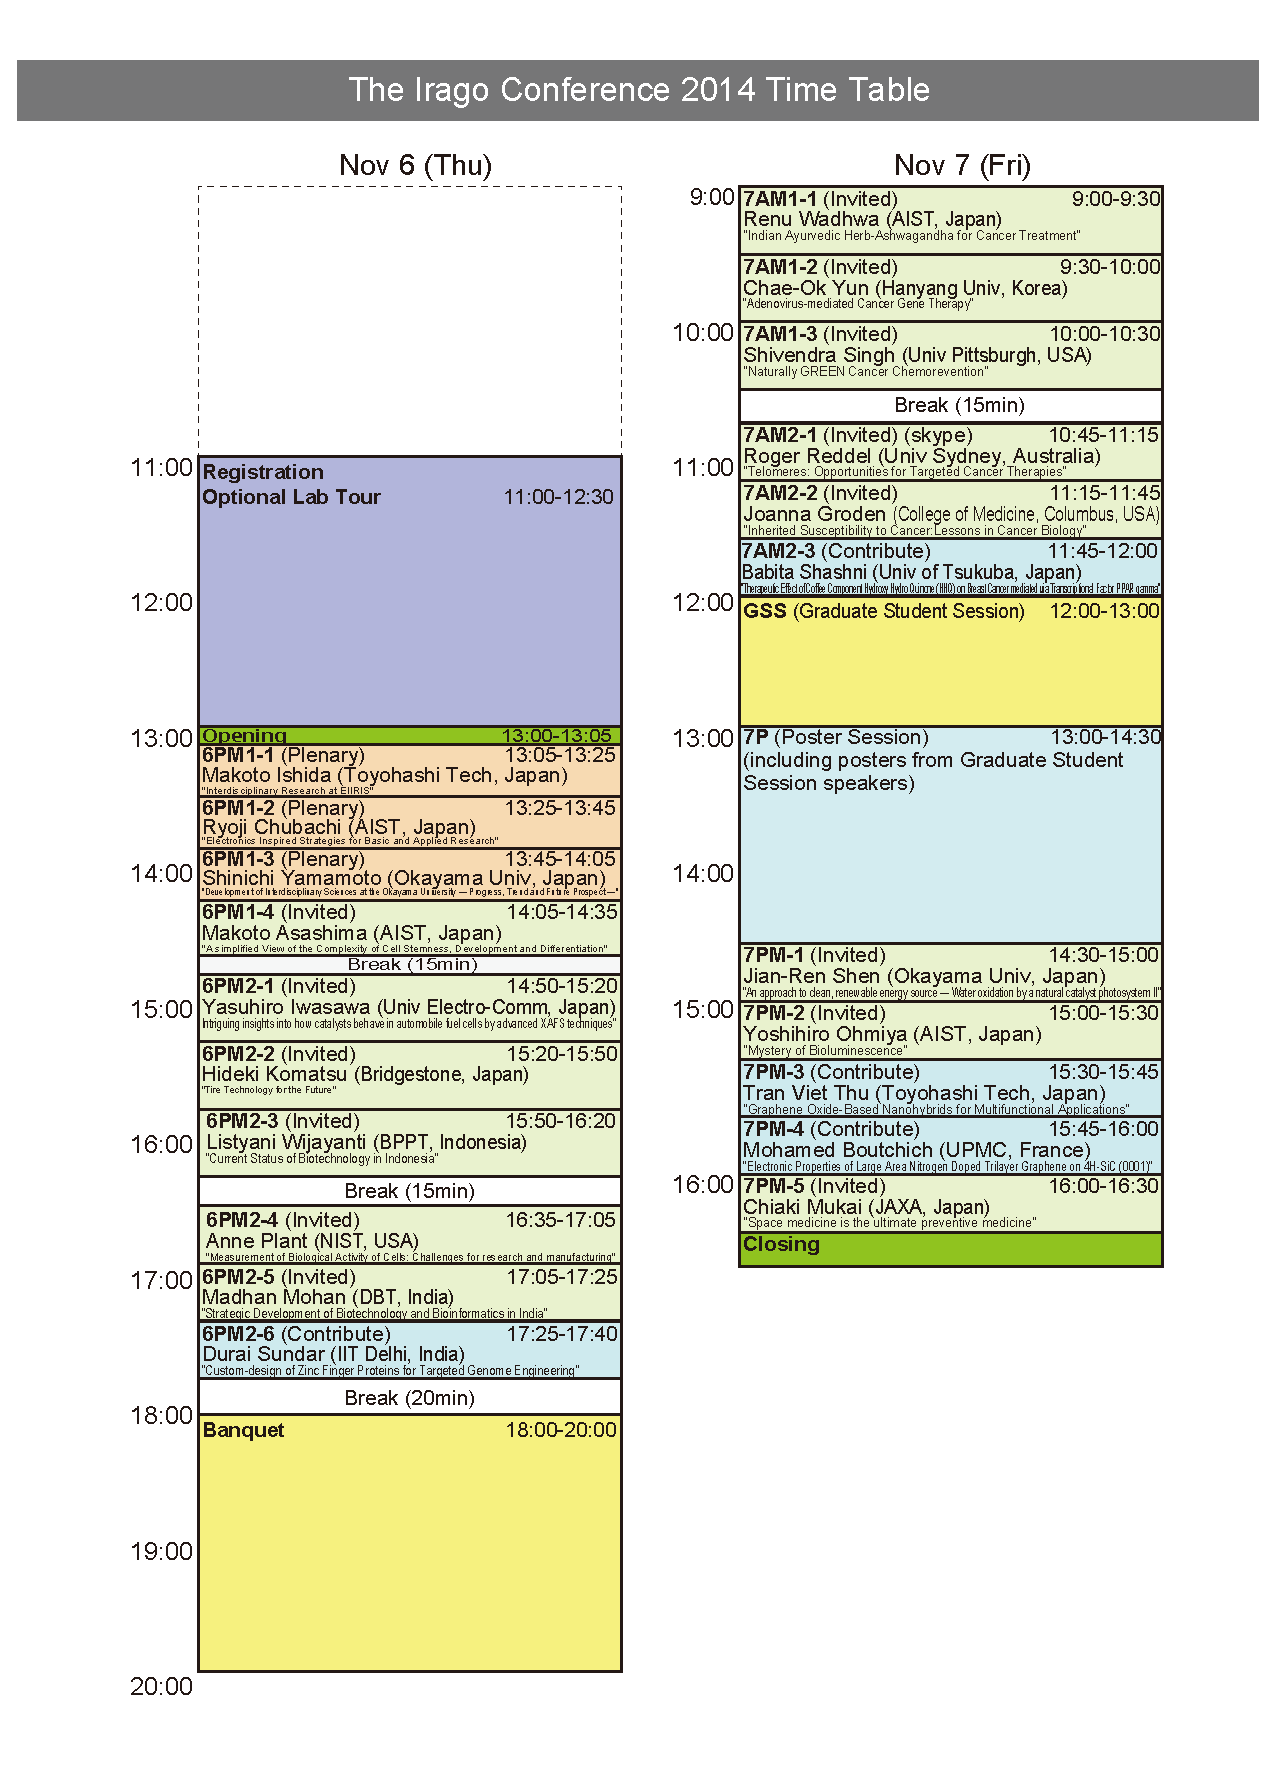 Time Table of the Irago Conference 2014